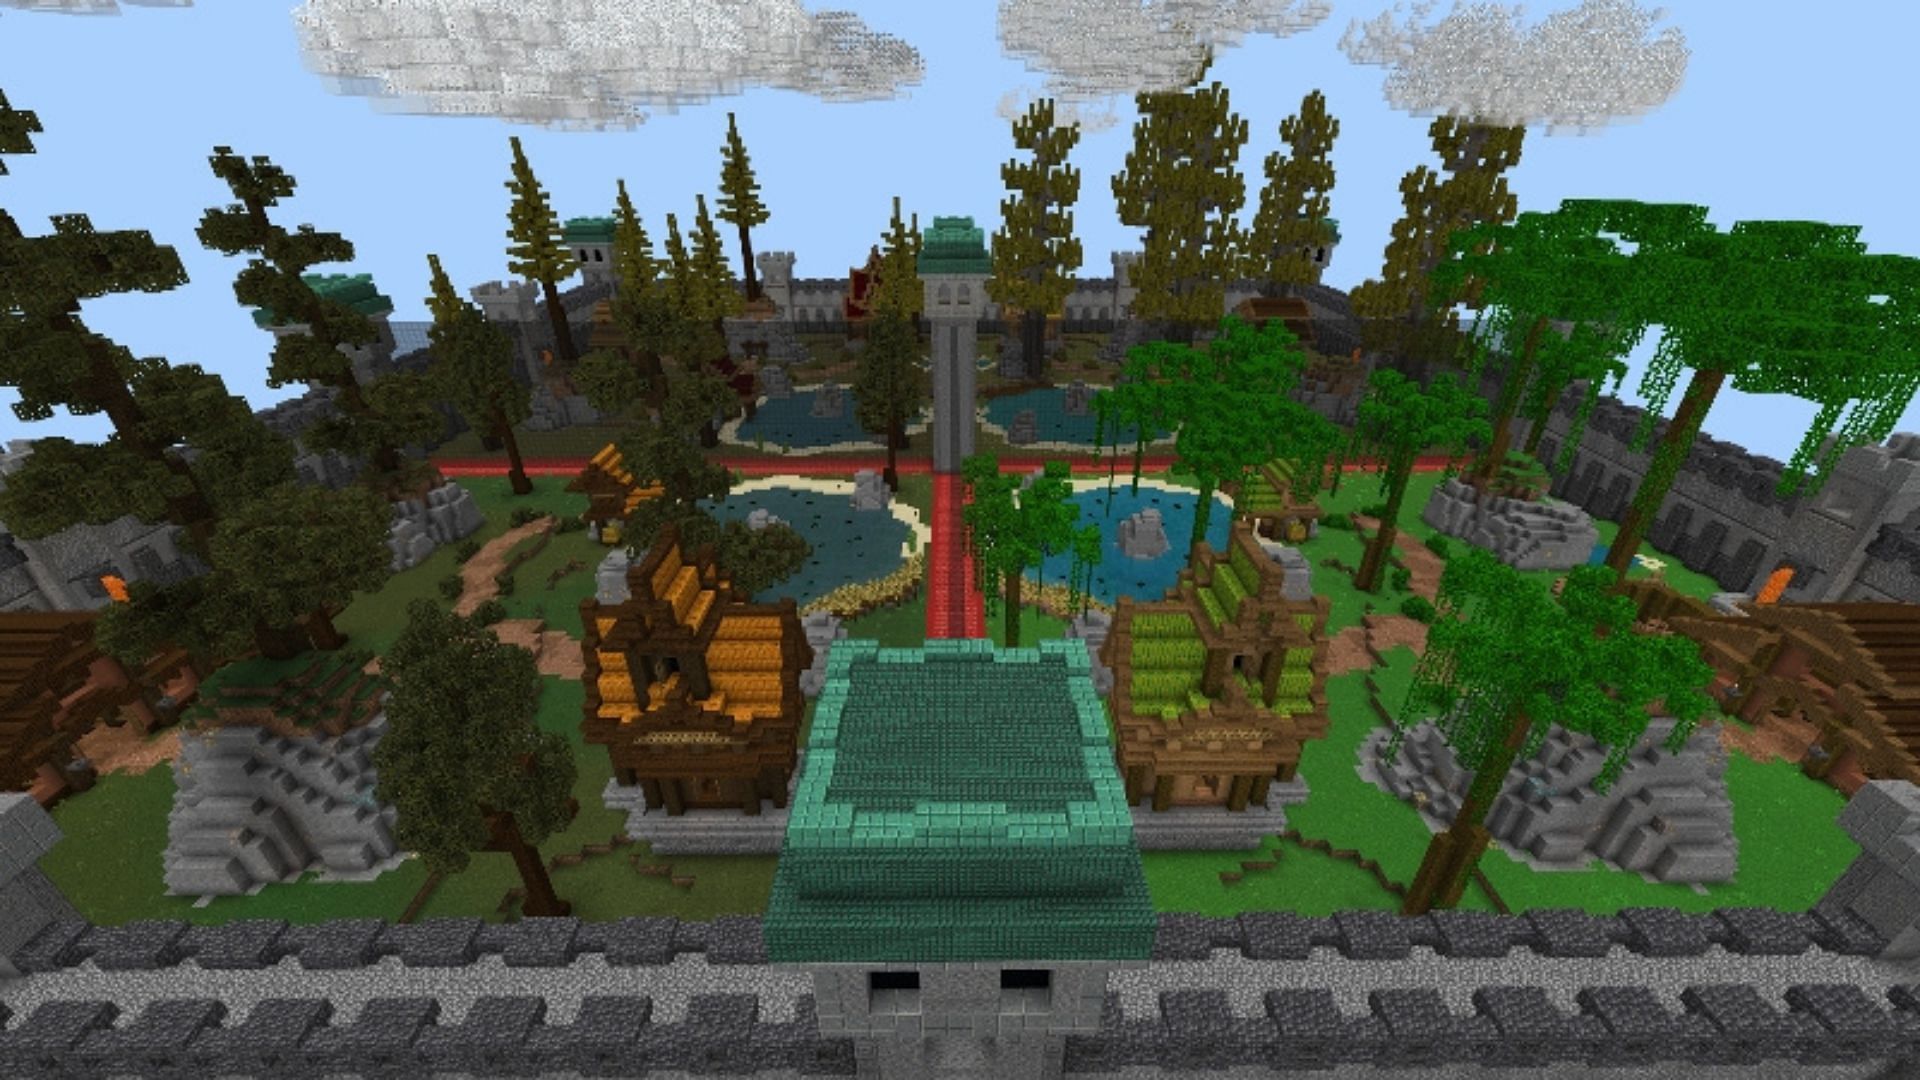 Walls mini-game in Minecraft Marketplace (Image via Minecraft Marketplace)